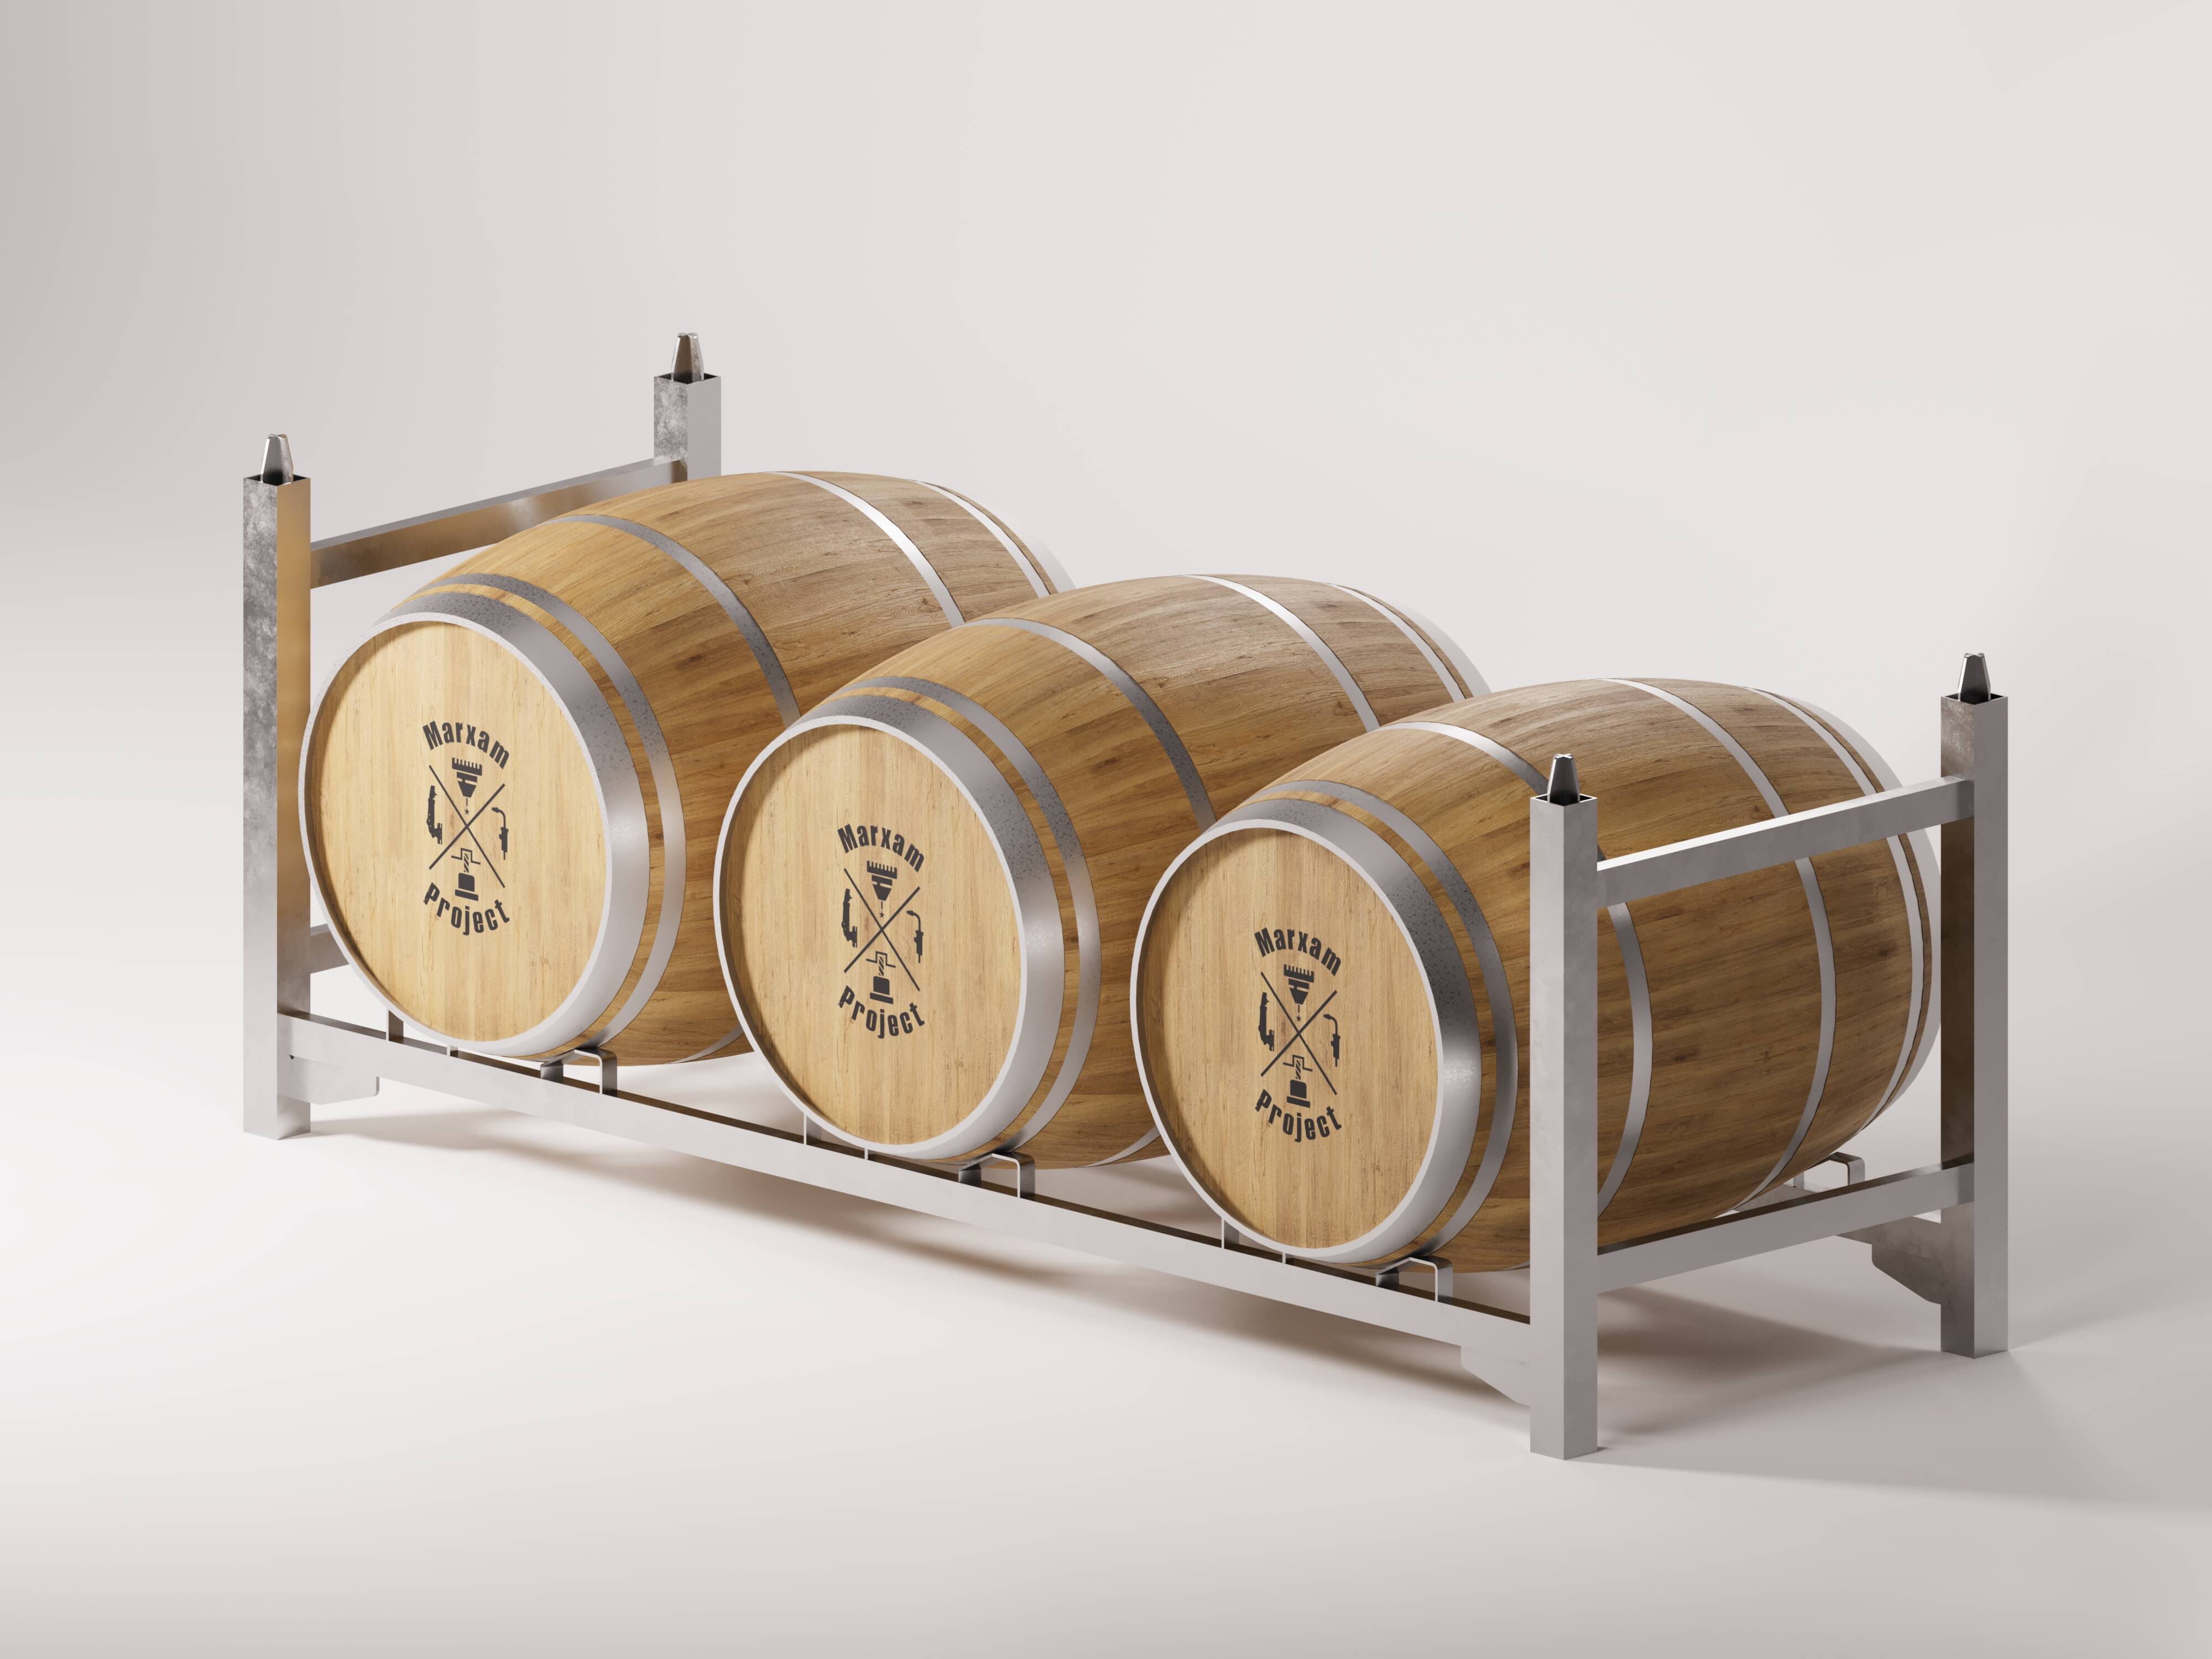 The picture displays a barrel cage containing three wooden barrels, which are neatly arranged on a metal rack and appear to be in a very good condition.